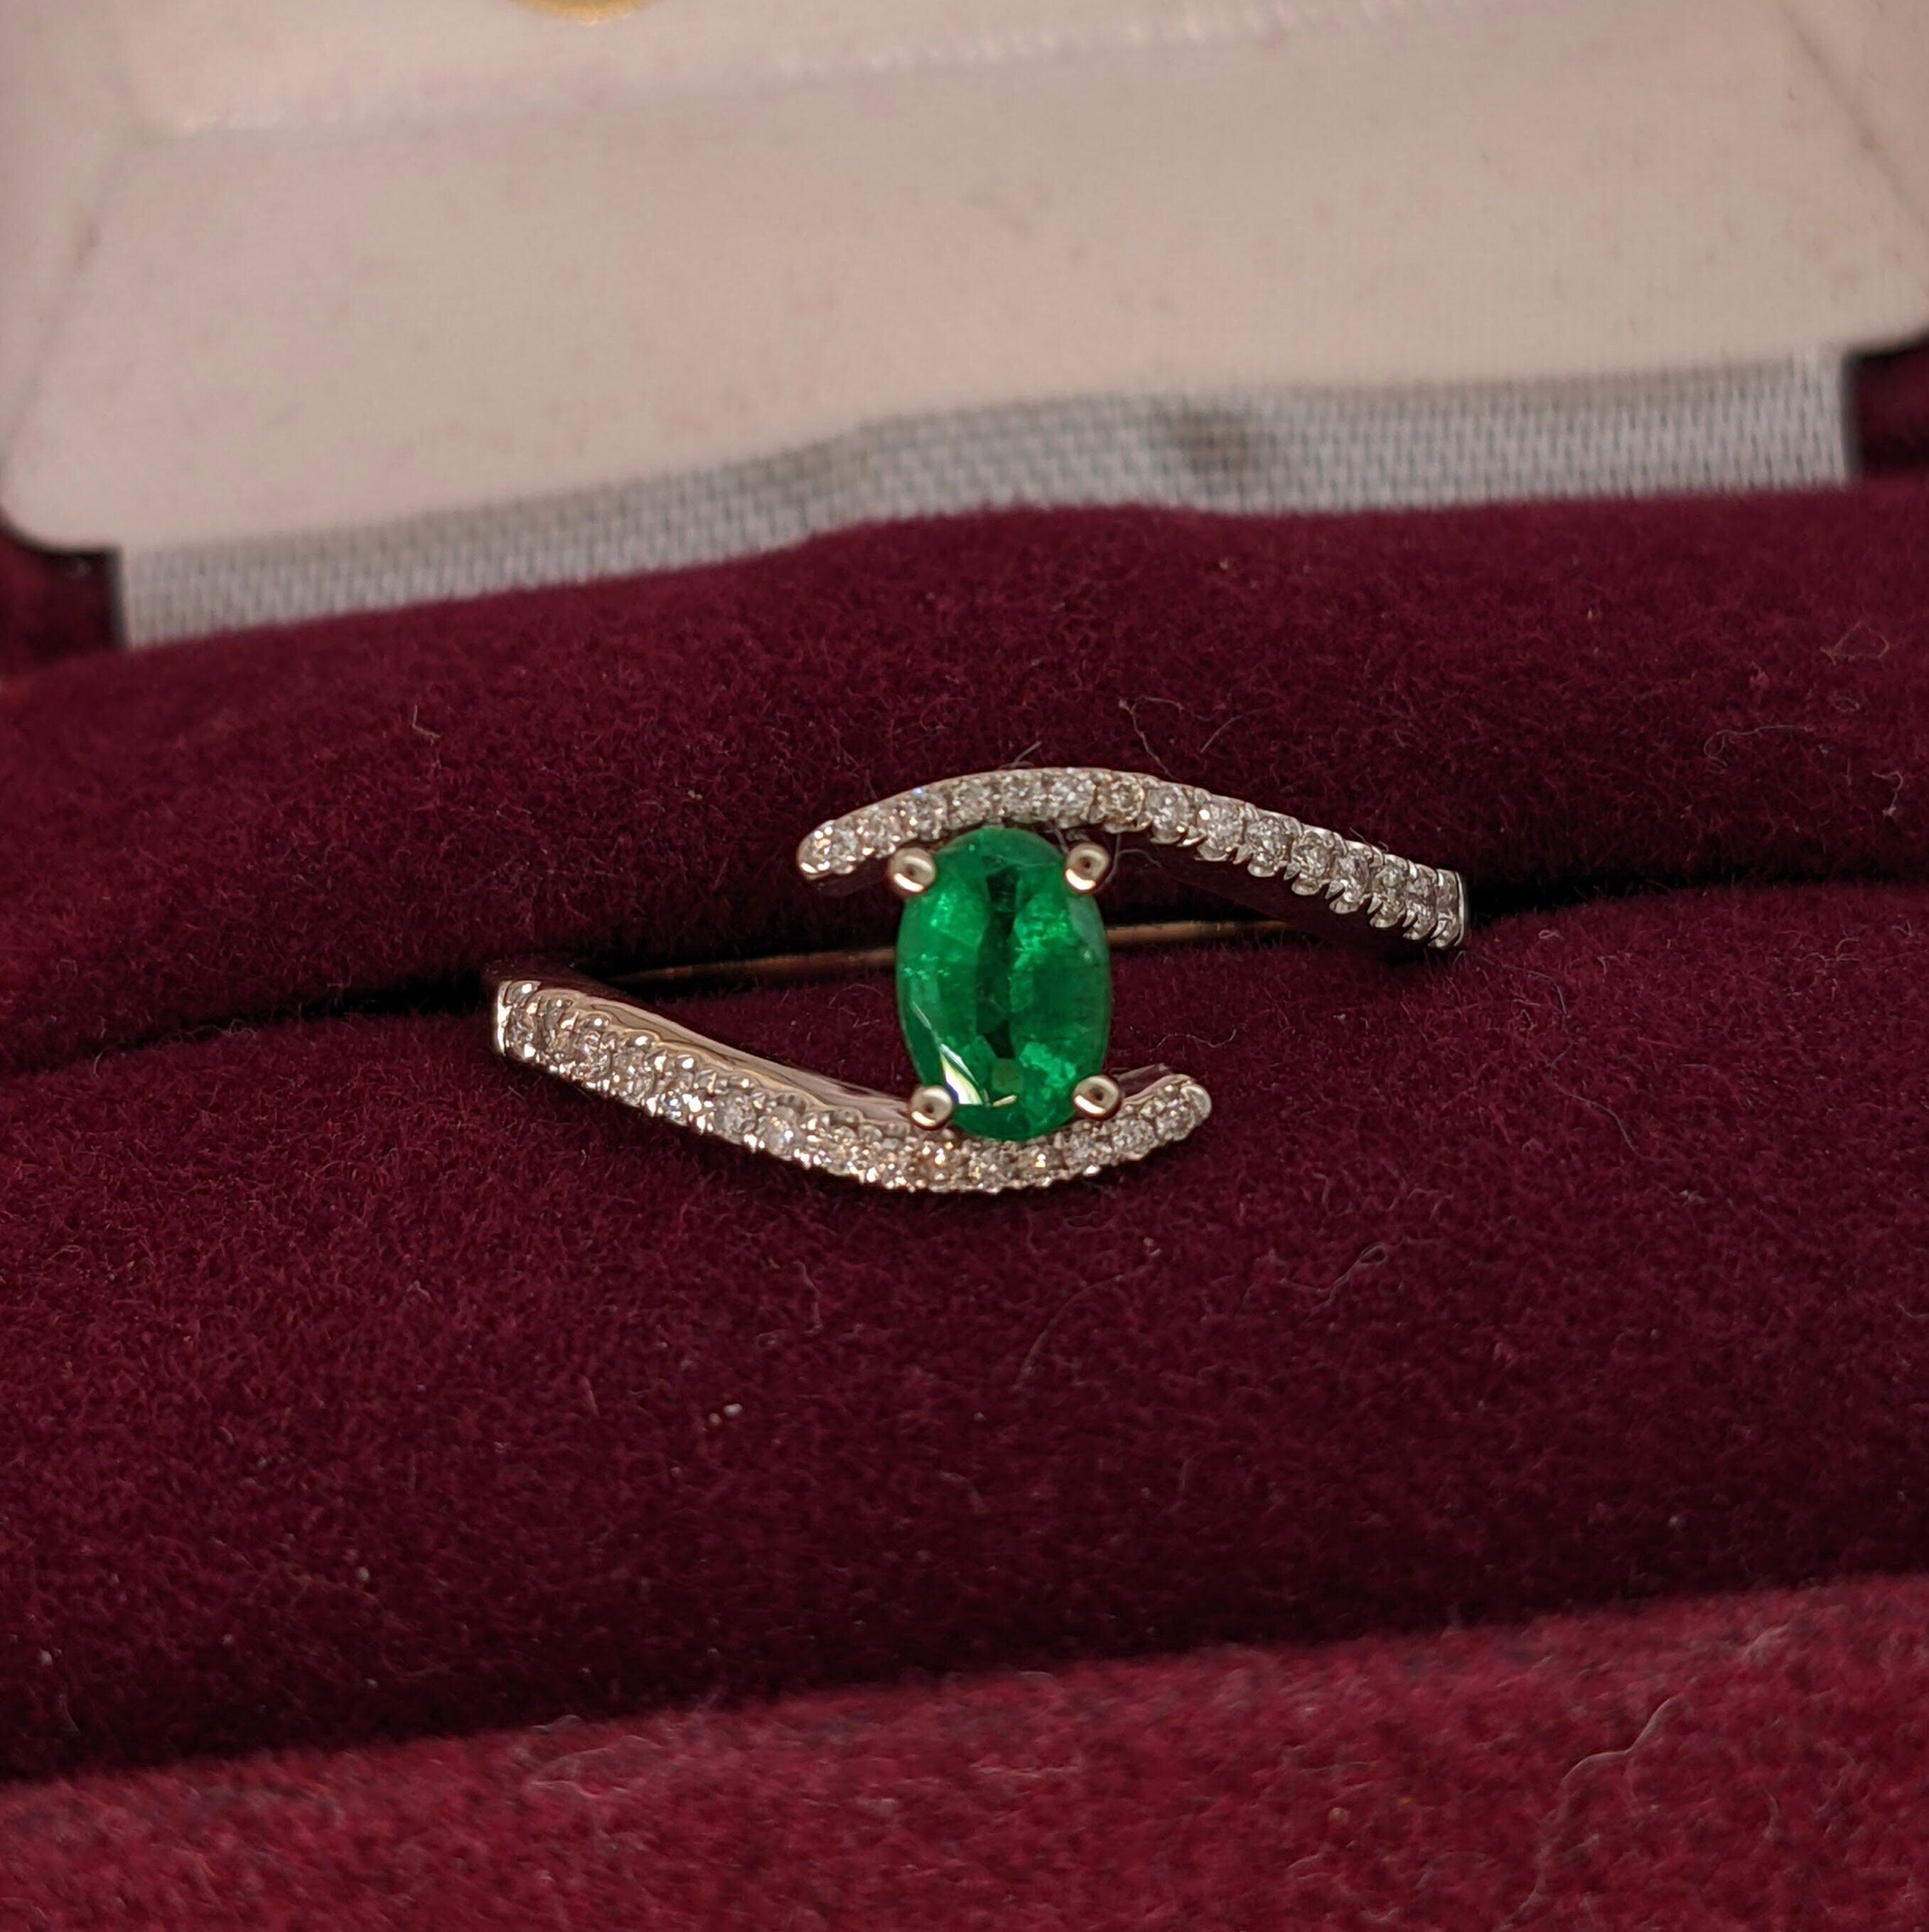 Pine Green Emerald Ring In 14k White Gold and pave diamond shank | Oval 6x4mm | May Birthstone | Bypass Ring | Wide Band | Christmas Gift